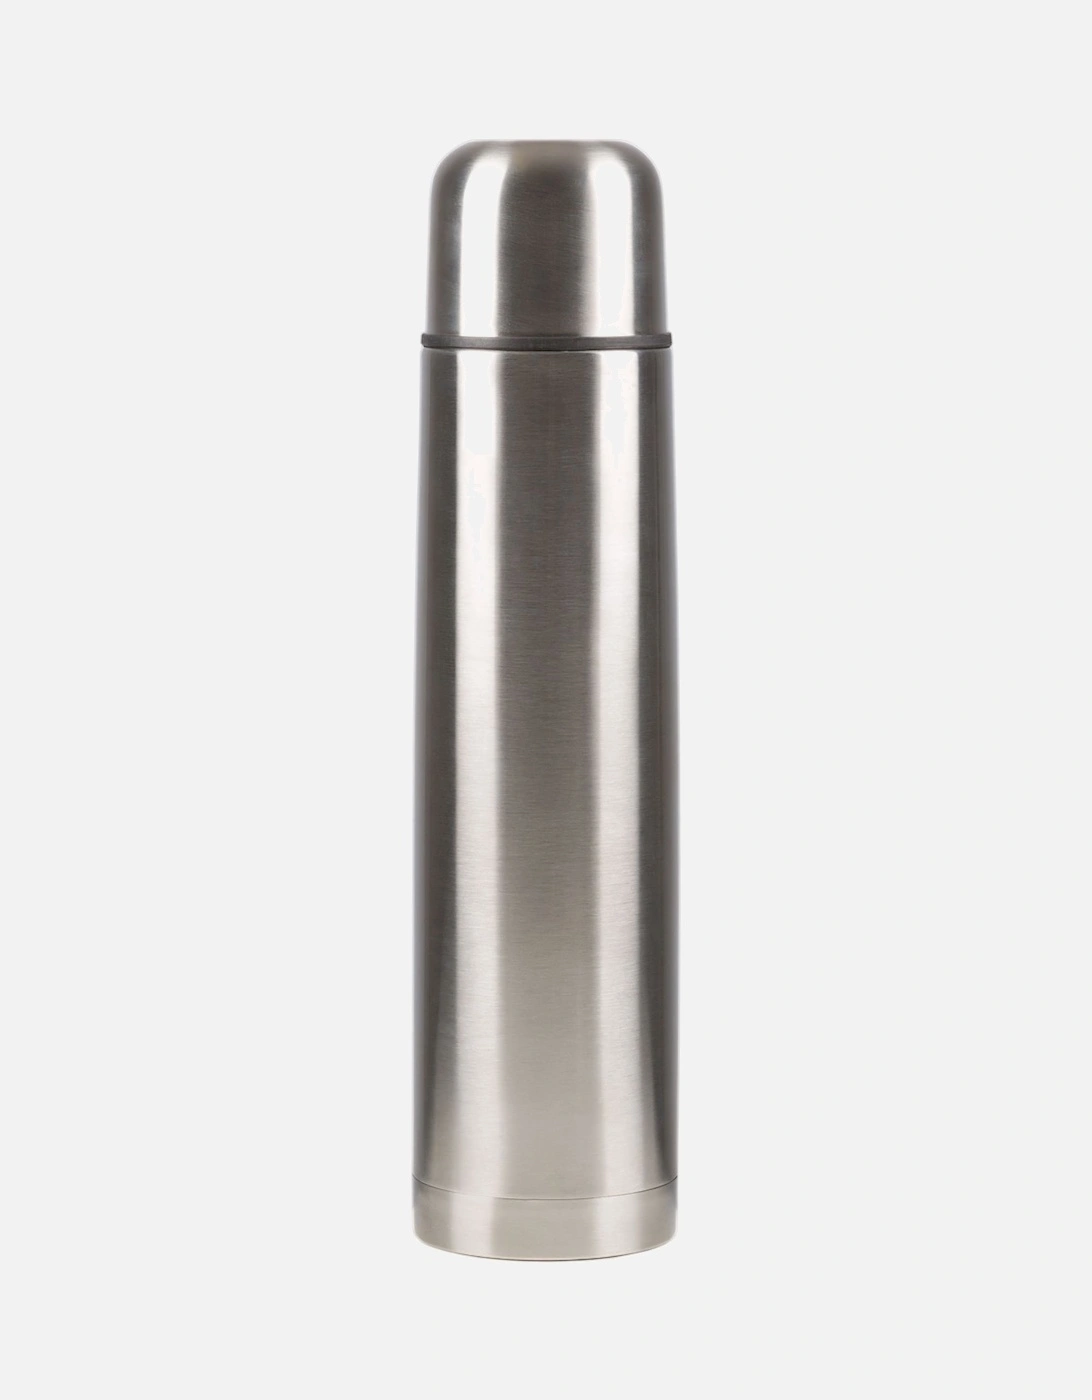 Thirst 100 Stainless Steel Flask (1L)